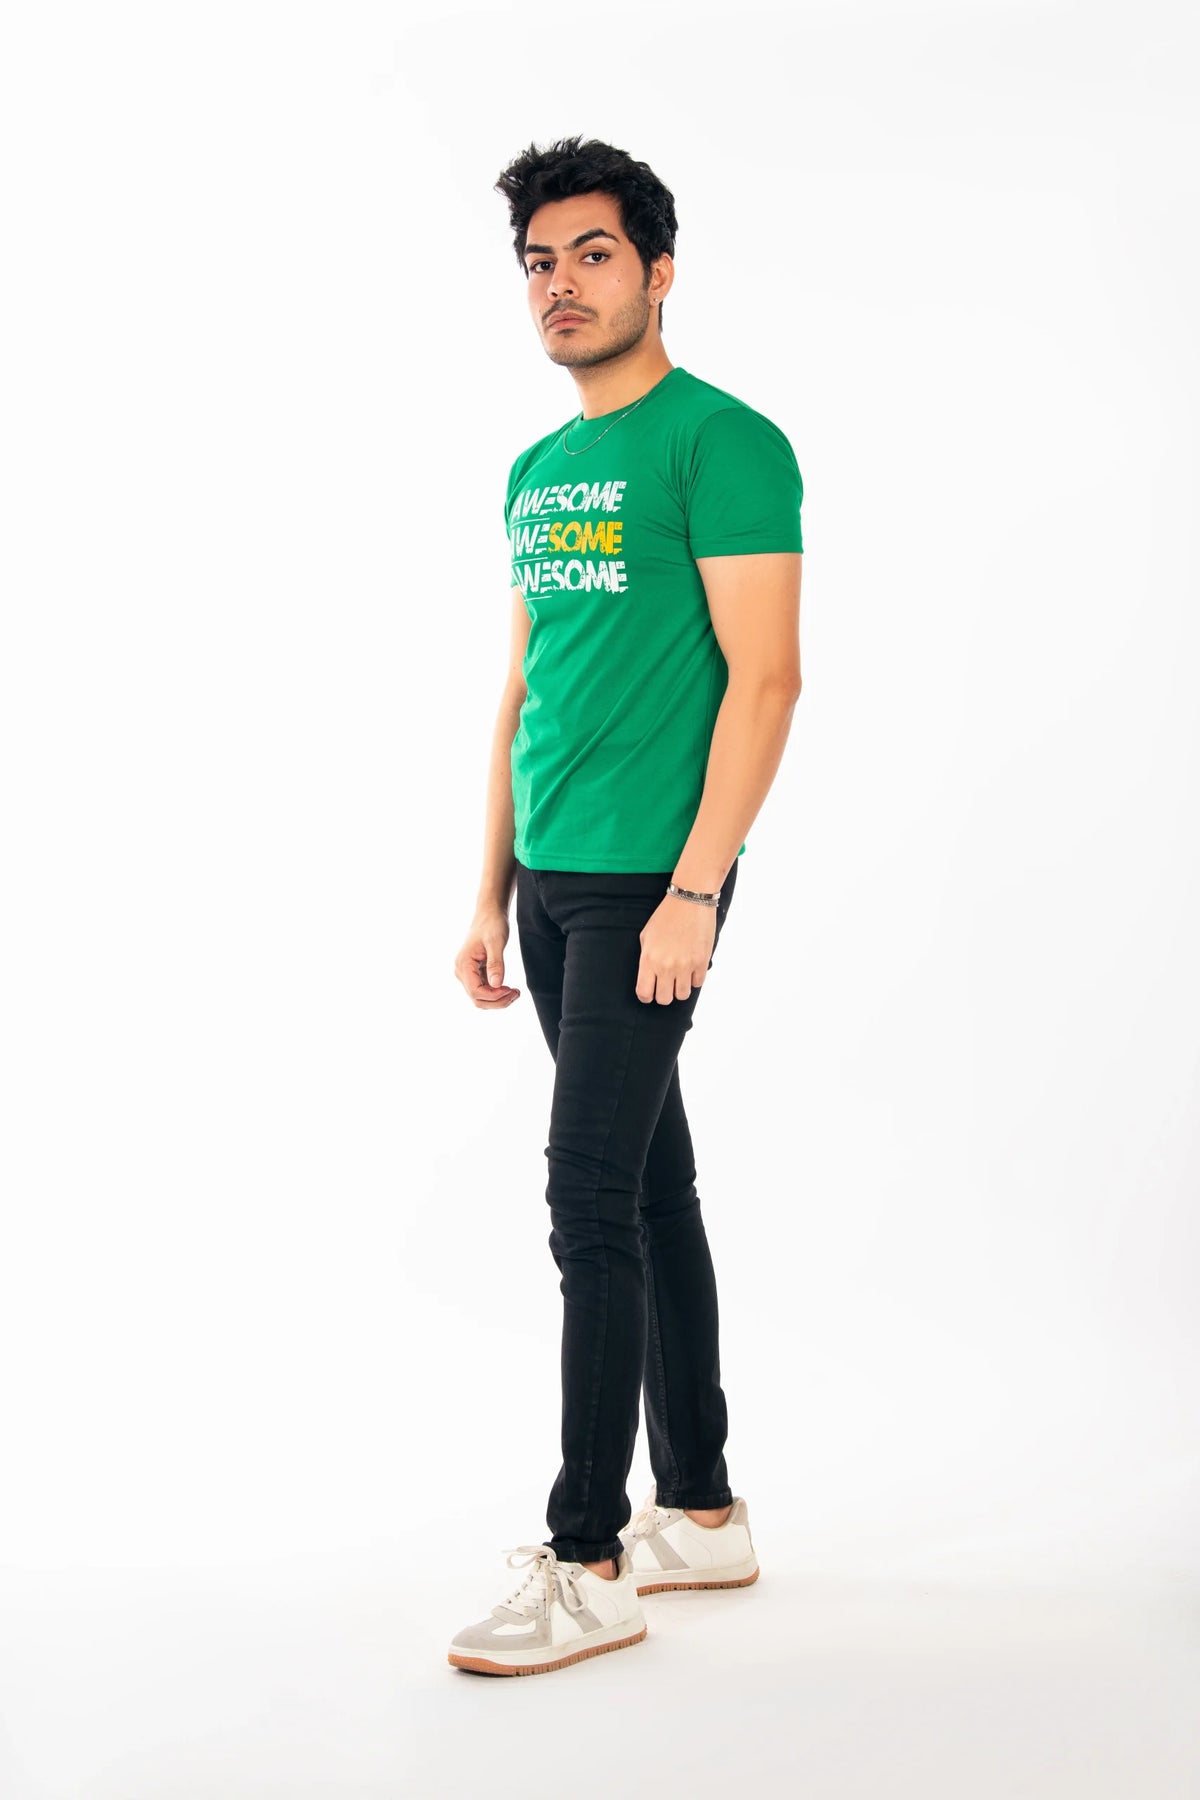 Awesome - Green Casual Tees